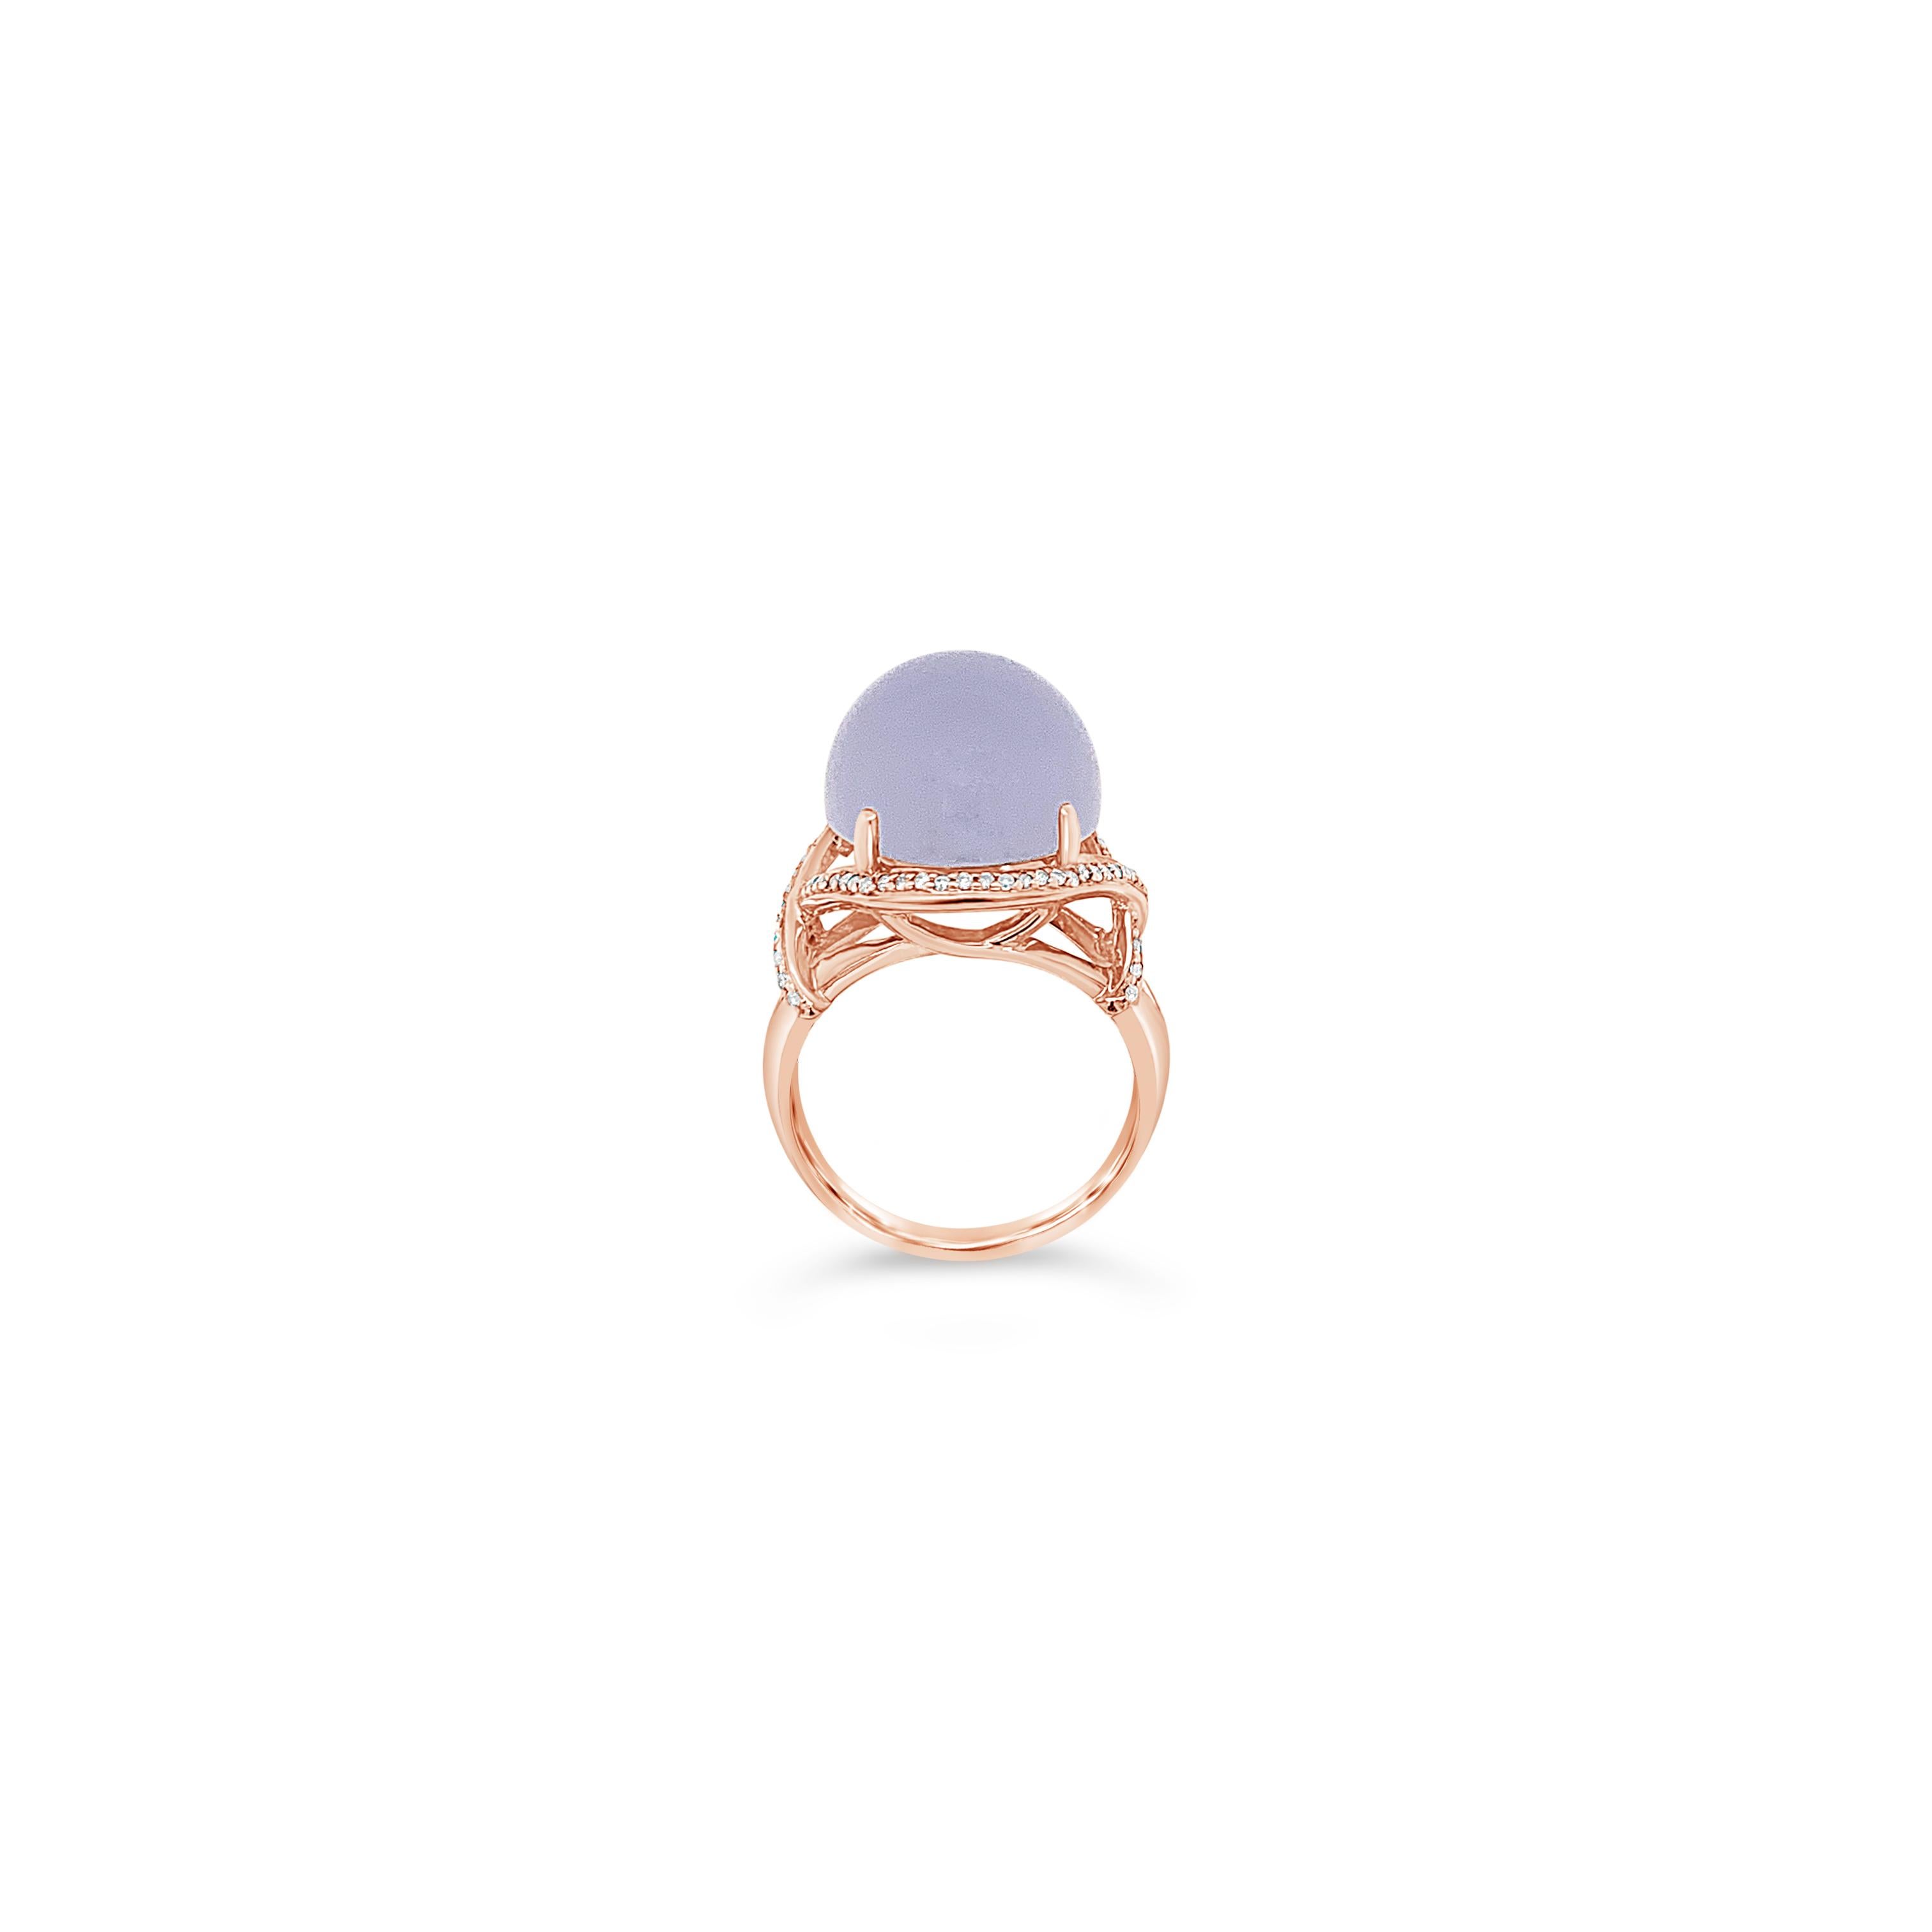 Carlo Viani® Ring featuring 12 cts. Chalcedony, 1/4 cts. Vanilla Diamonds® set in 14K Strawberry Gold®

Diamonds Breakdown:
1/4 cts White Diamonds

Gems Breakdown:
12 cts Chalcedony

Please feel free to reach out with any questions!

Item comes with